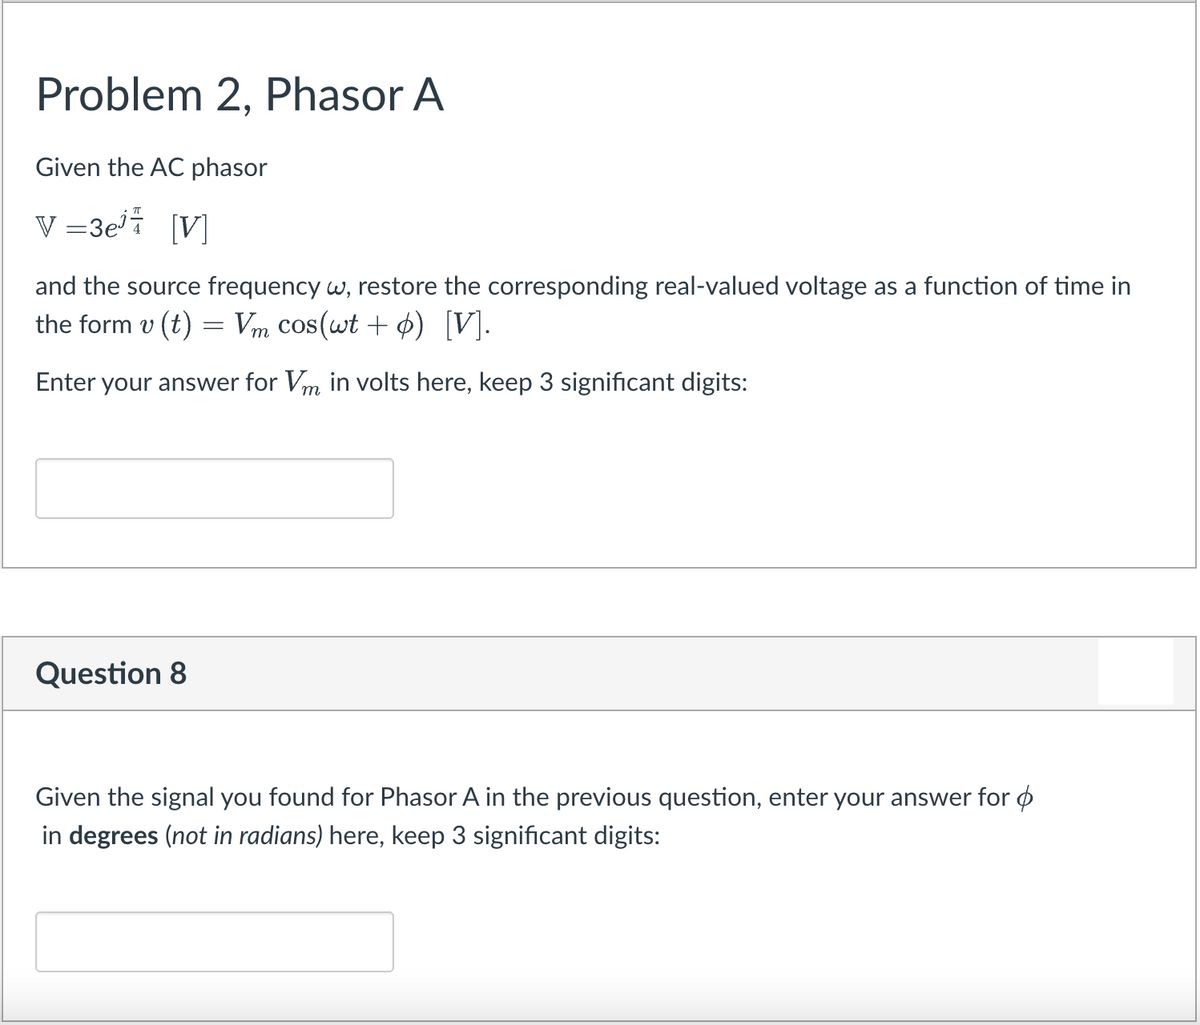 Problem 2, Phasor A
Given the AC phasor
V =3ei [V]
and the source frequency w, restore the corresponding real-valued voltage as a function of time in
the form v (t) = Vm cos(wt + ¢) [V].
Enter your answer for Vm in volts here, keep 3 significant digits:
Question 8
Given the signal you found for Phasor A in the previous question, enter your answer for ø
in degrees (not in radians) here, keep 3 significant digits:
